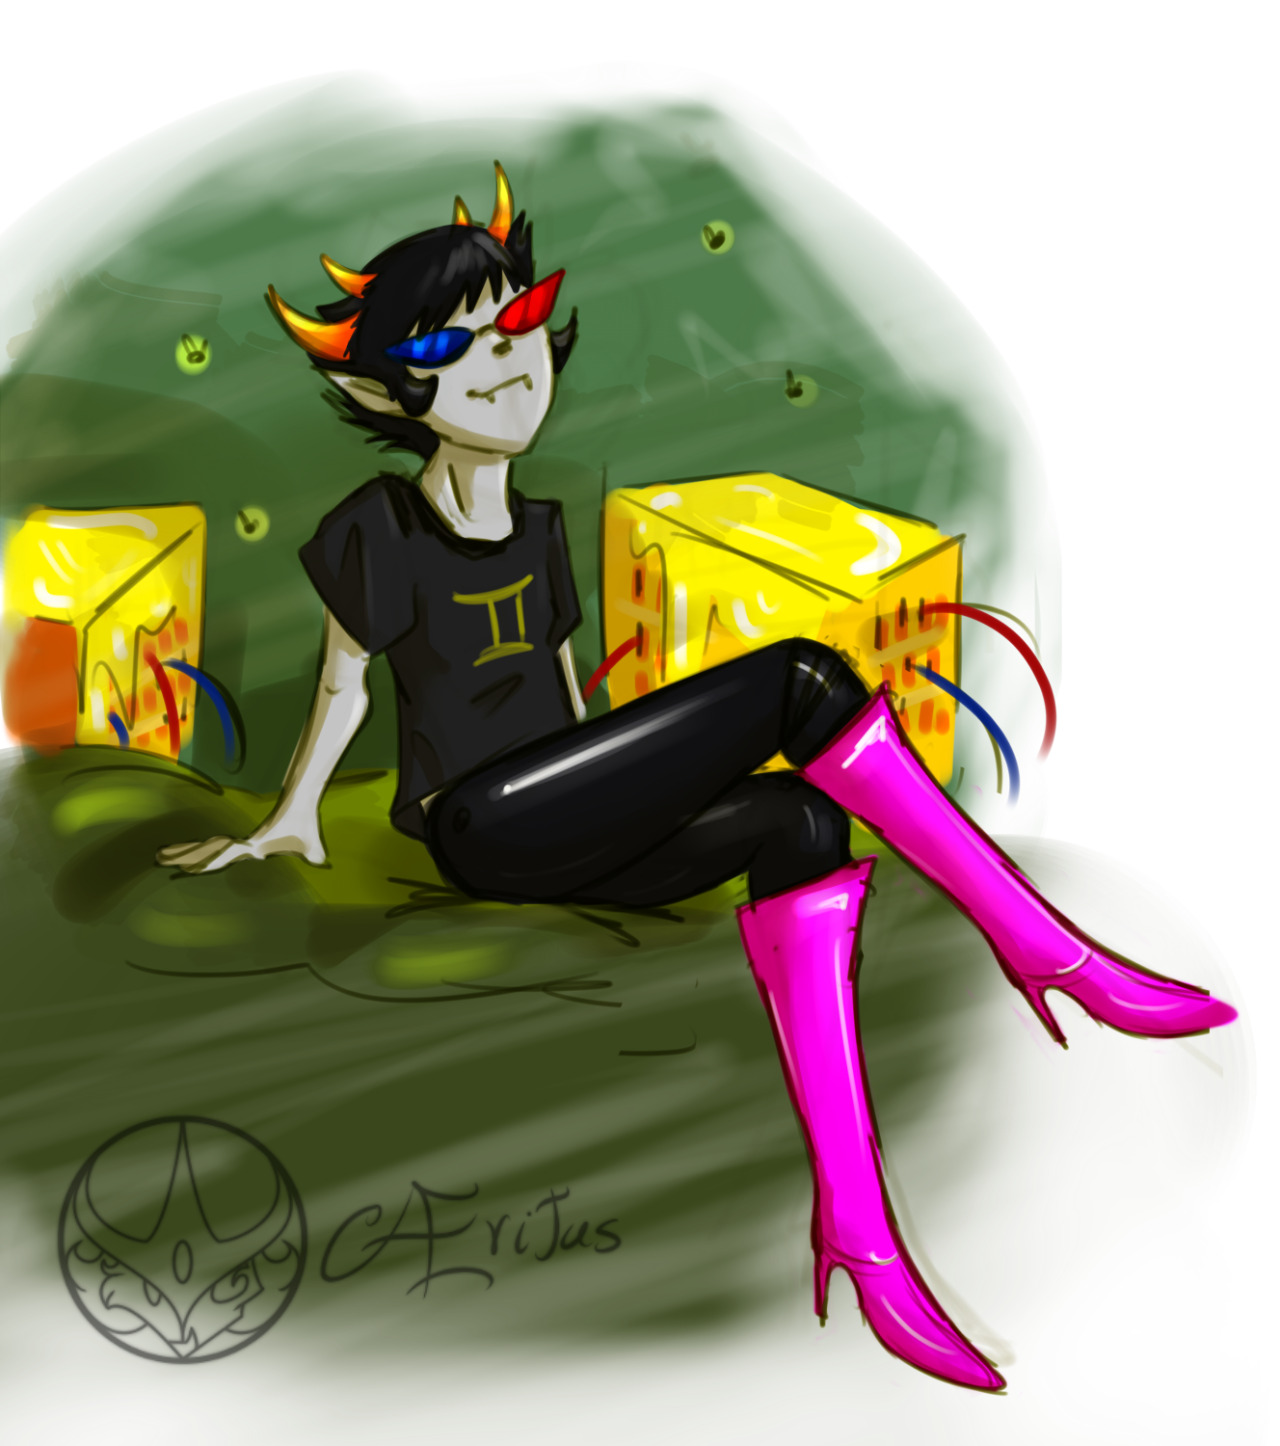 - send in group-chat a picture of Nepeta with Mettaton’s legs-Friend: “Why Nepeta?